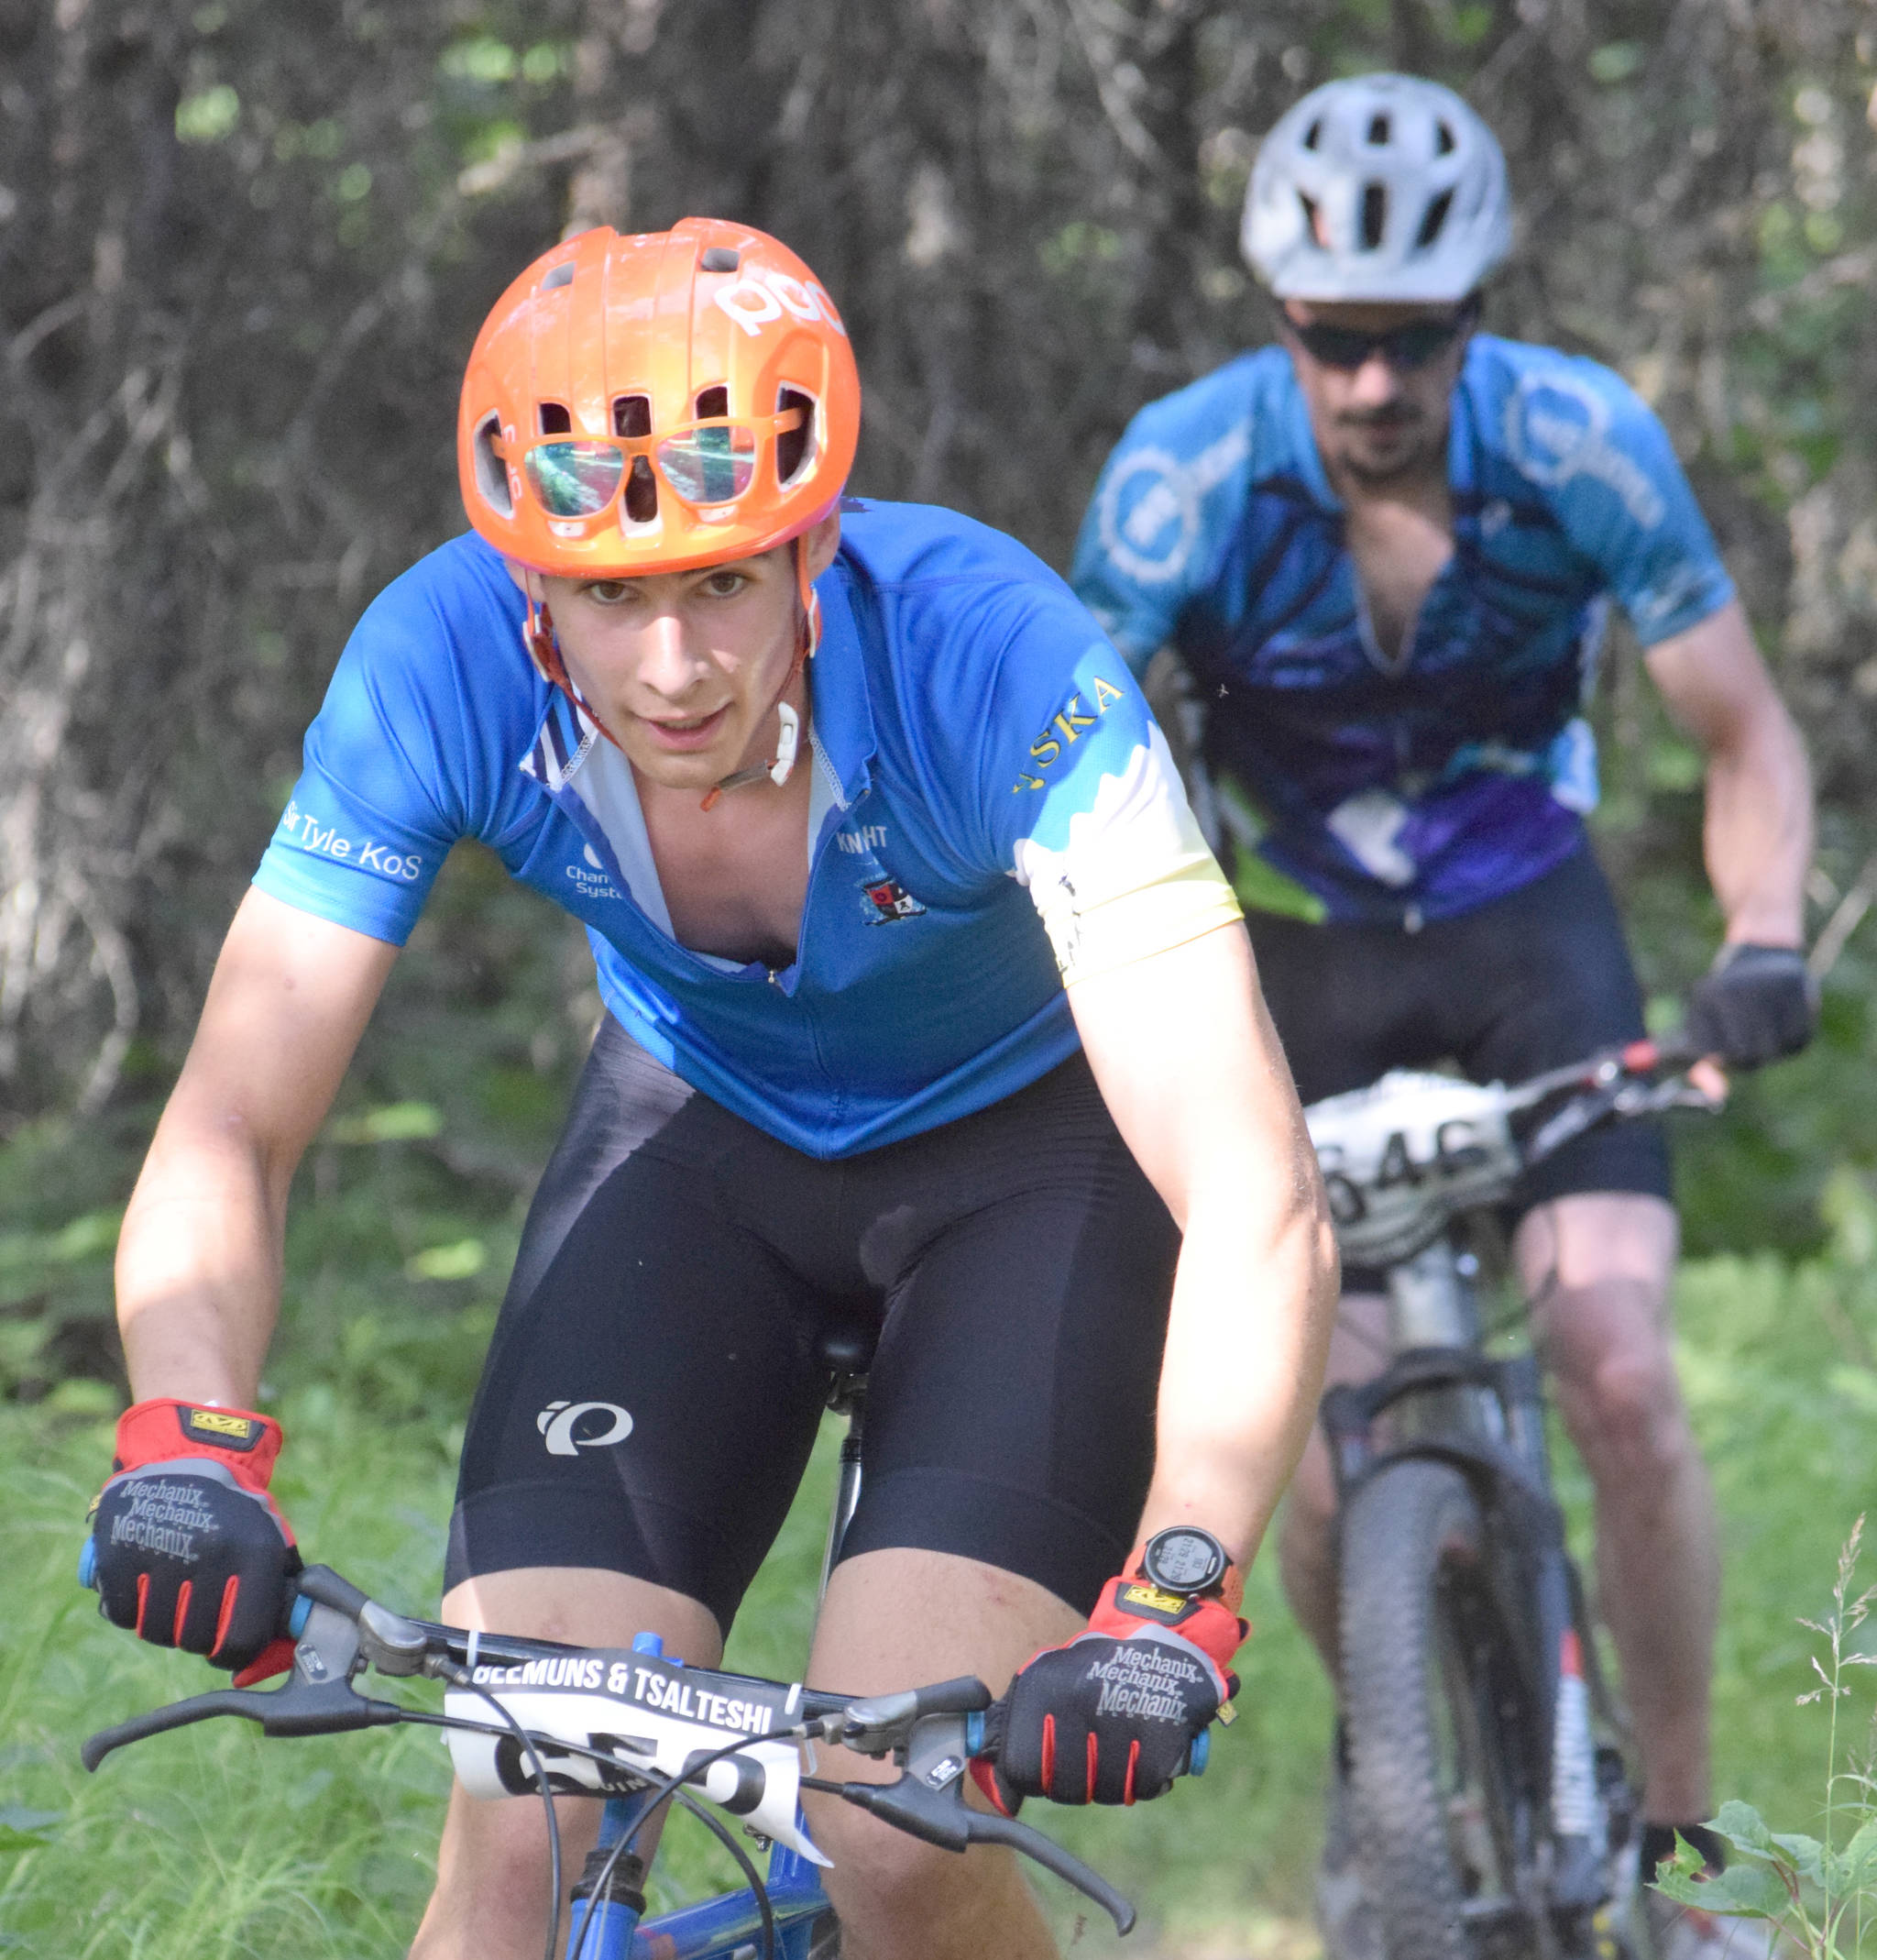 Tyle Owens leads Nathan Kincaid at Week 3 of the Soldotna Cycle Series on Thursday, July 18, 2019, at Tsalteshi Trails. (Photo by Jeff Helminiak/Peninsula Clarion)